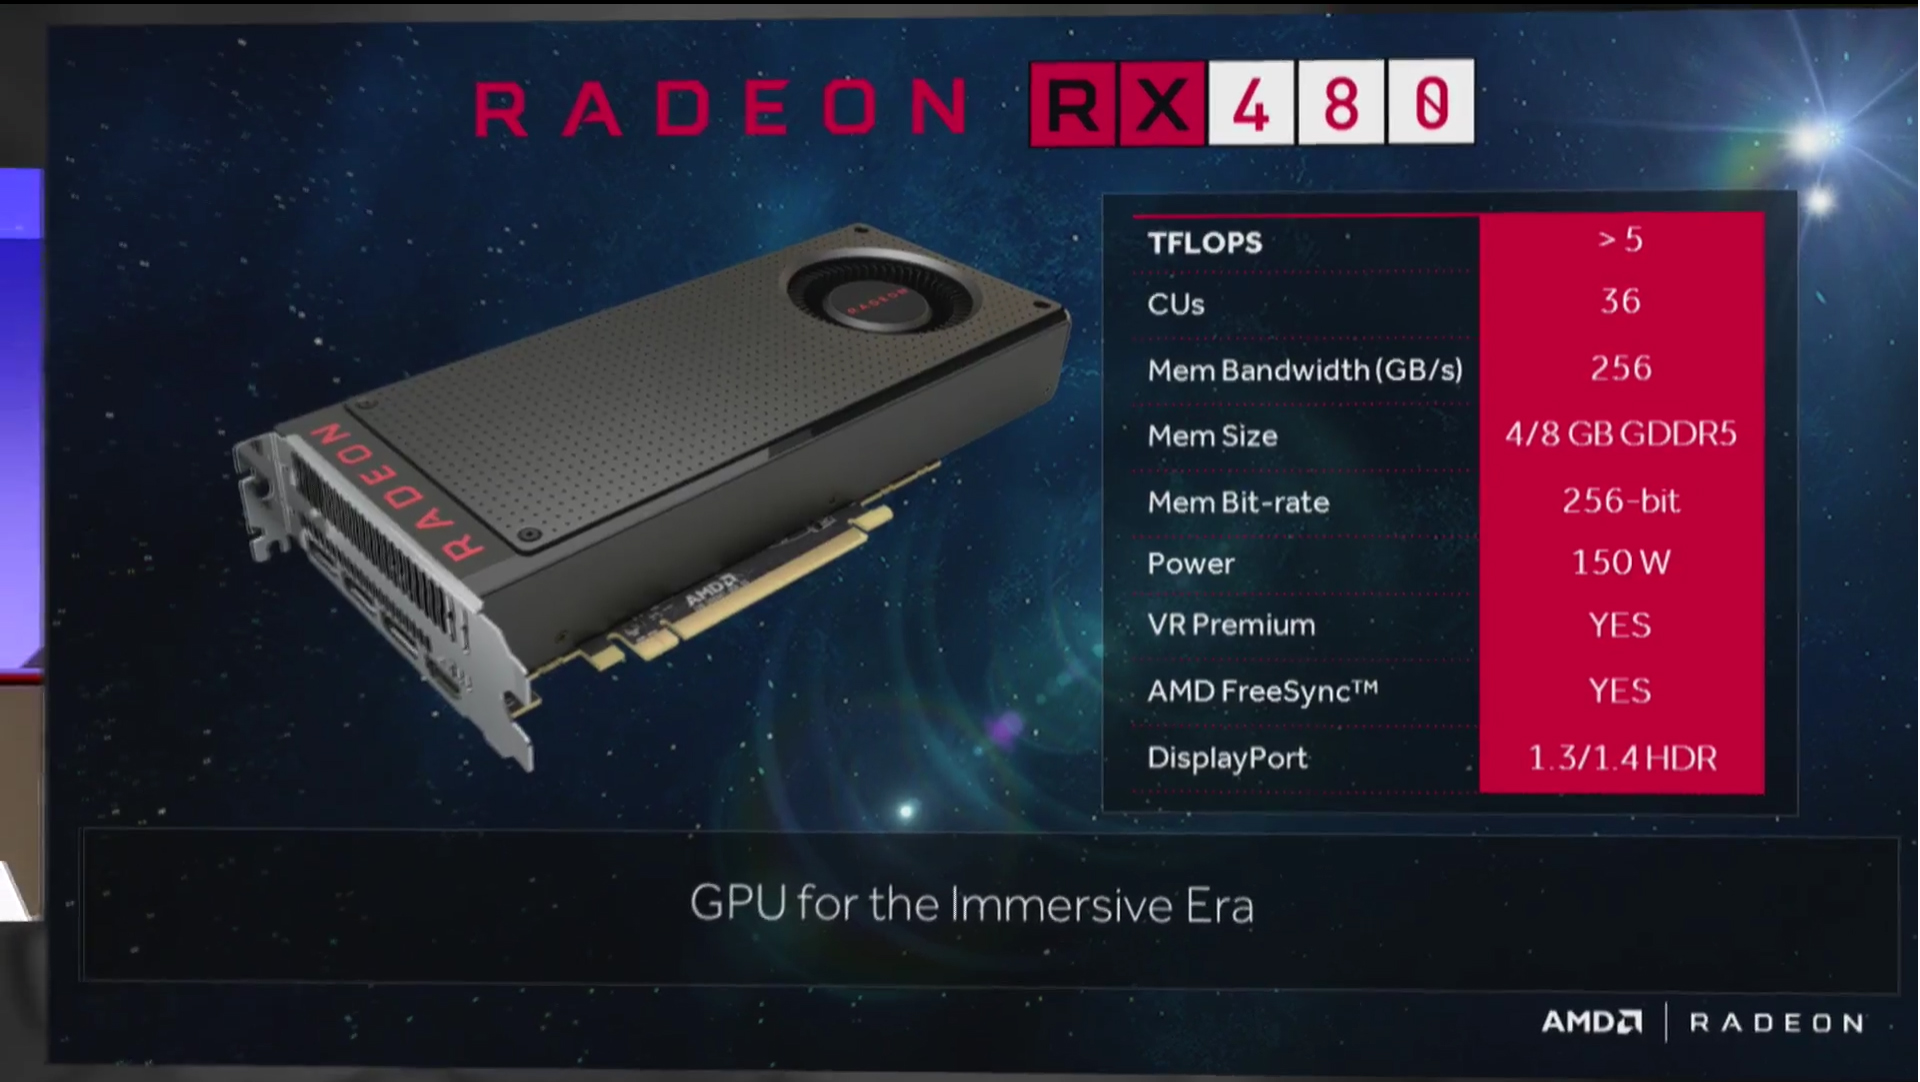 Memory Unlock Mod for AMD Radeon RX 480 Can Double Your Memory Capacity